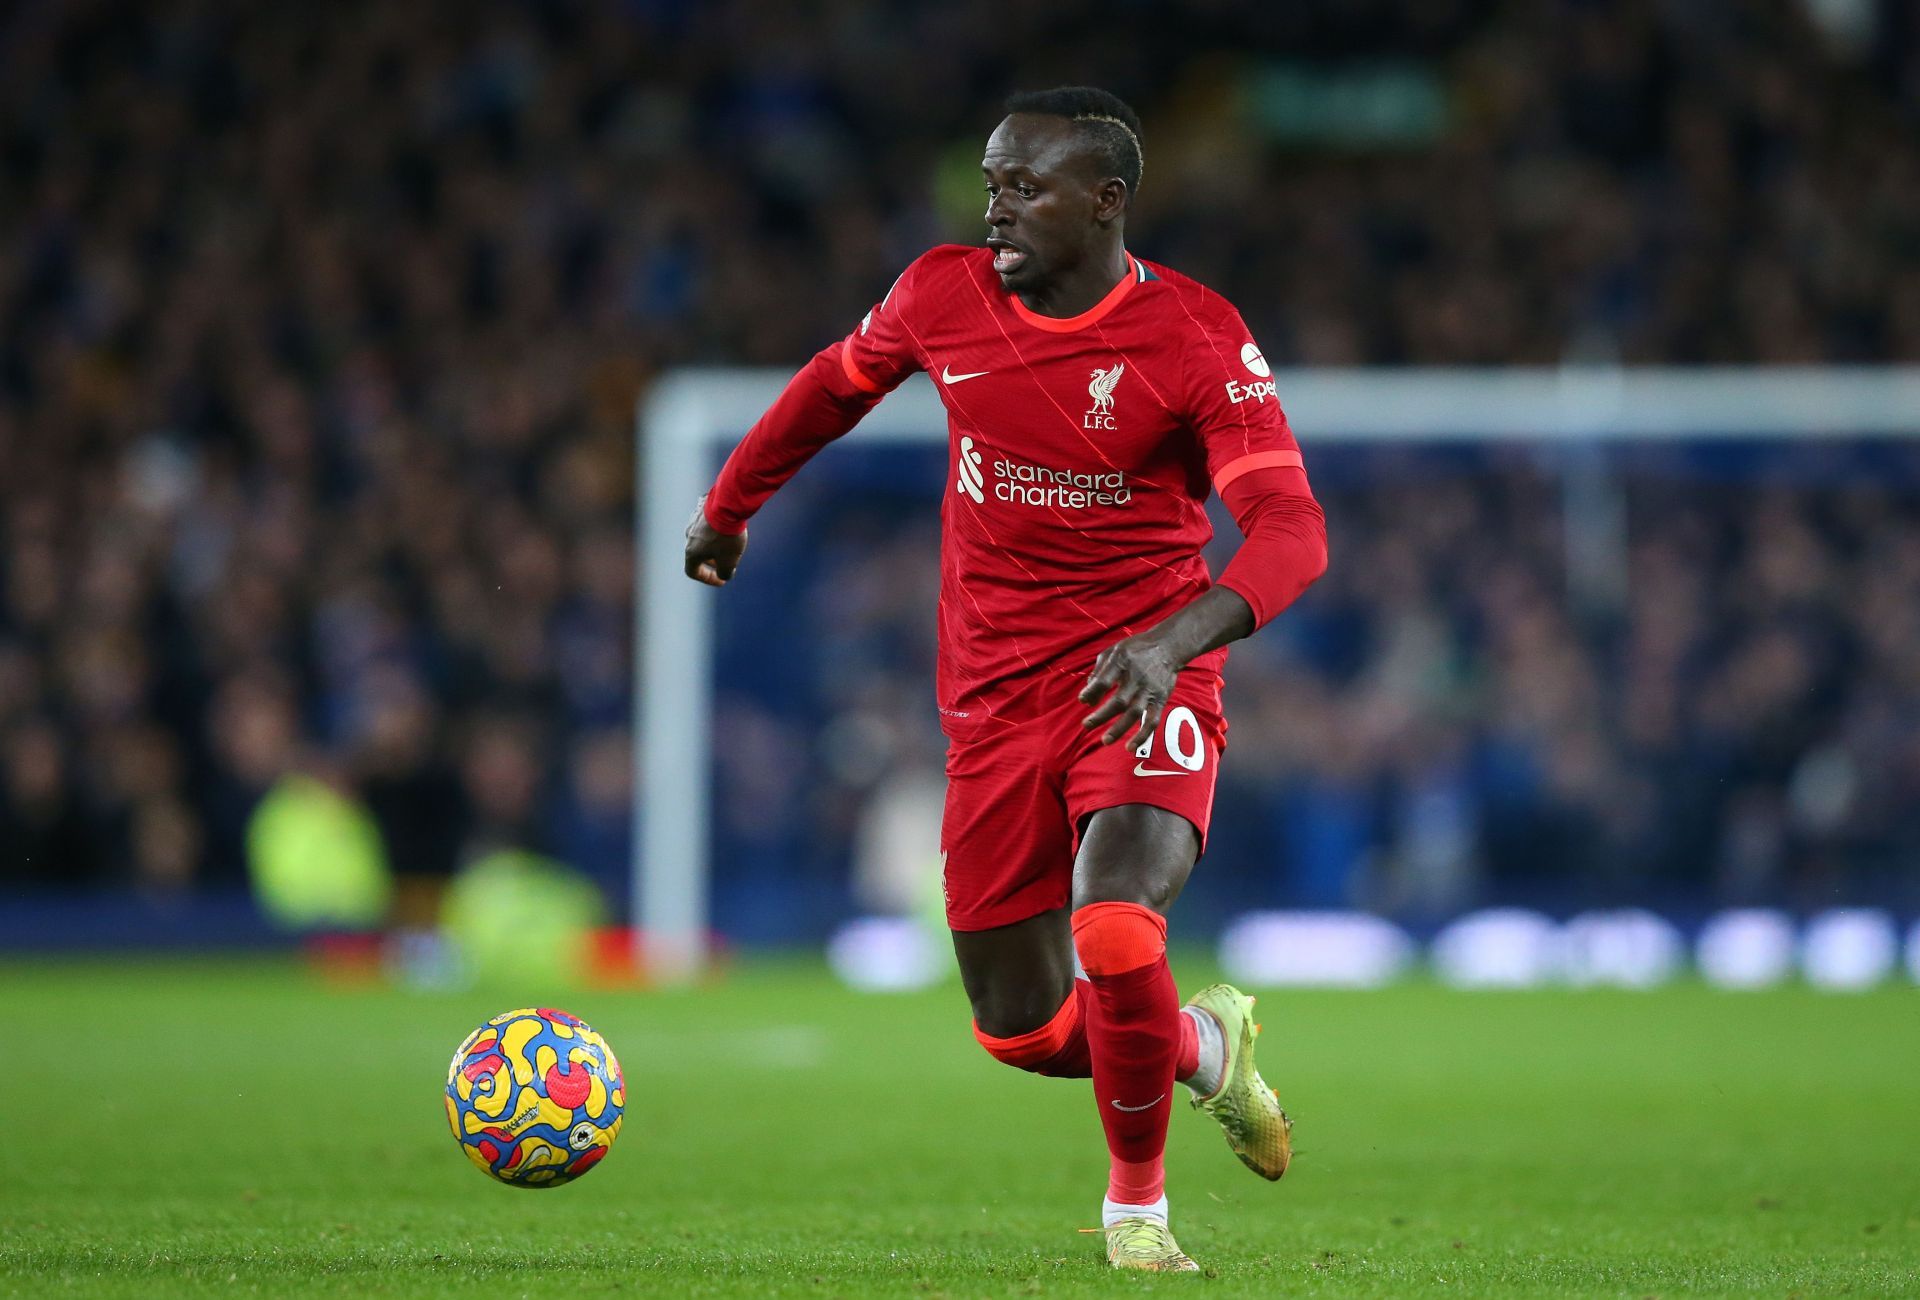 Sadio Mane was a great signing for Klopp.